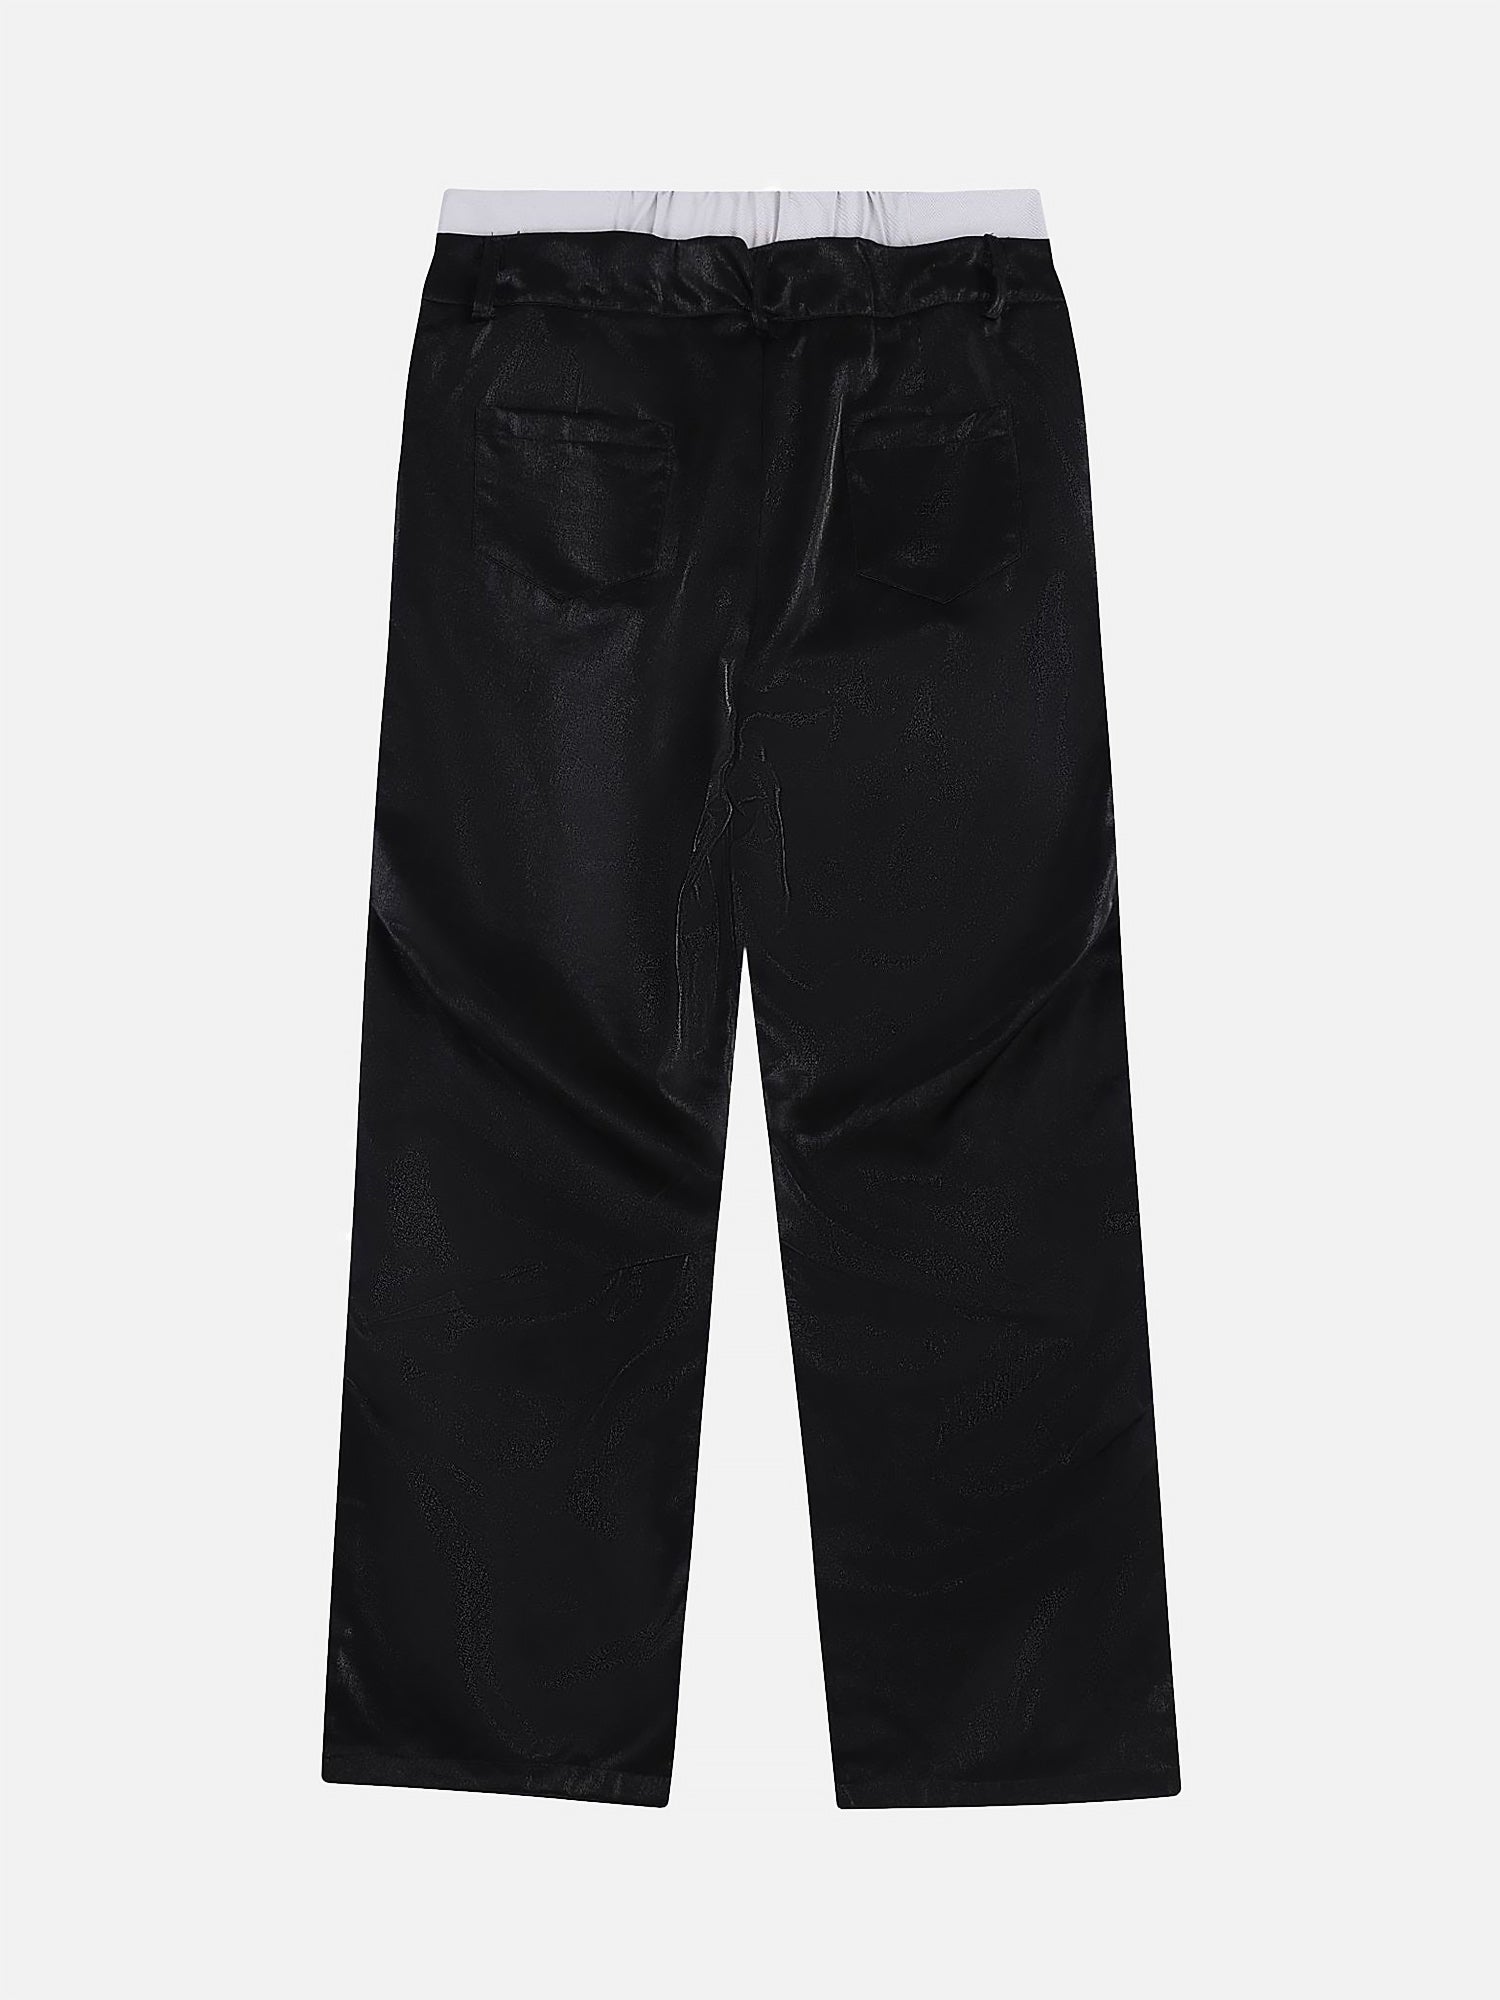 Thesupermade American Retro Heavy Industry Straight Loose Casual Trousers -1883